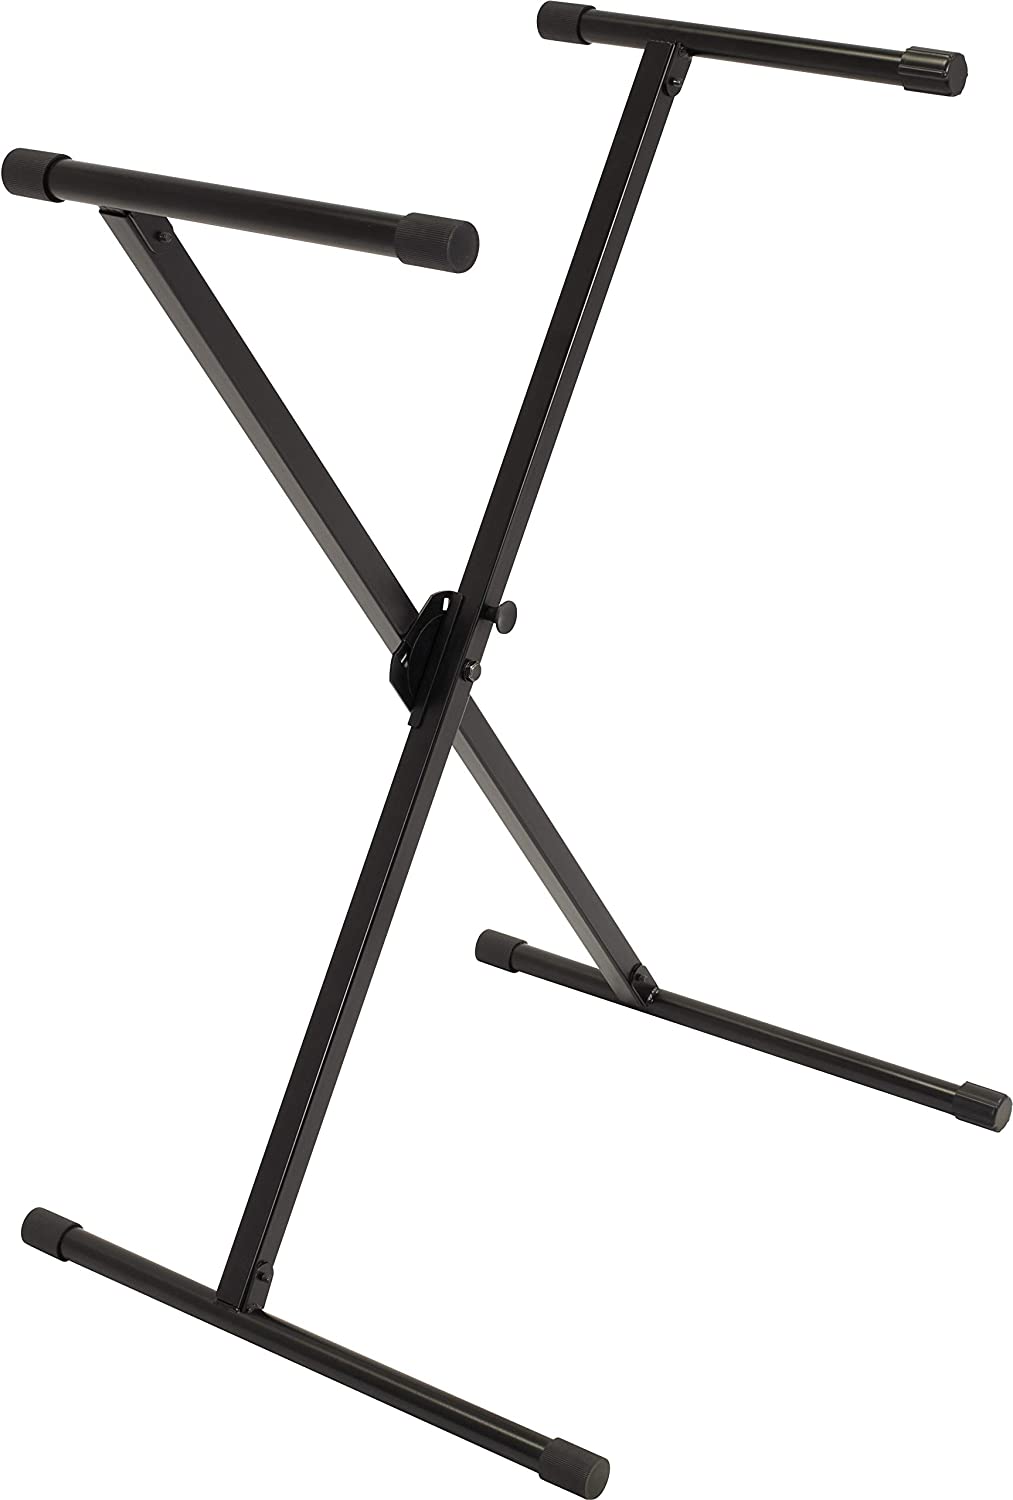 Ultimate Support IQ-X-1000 X-style Keyboard Stand with Patented Memory Lock System